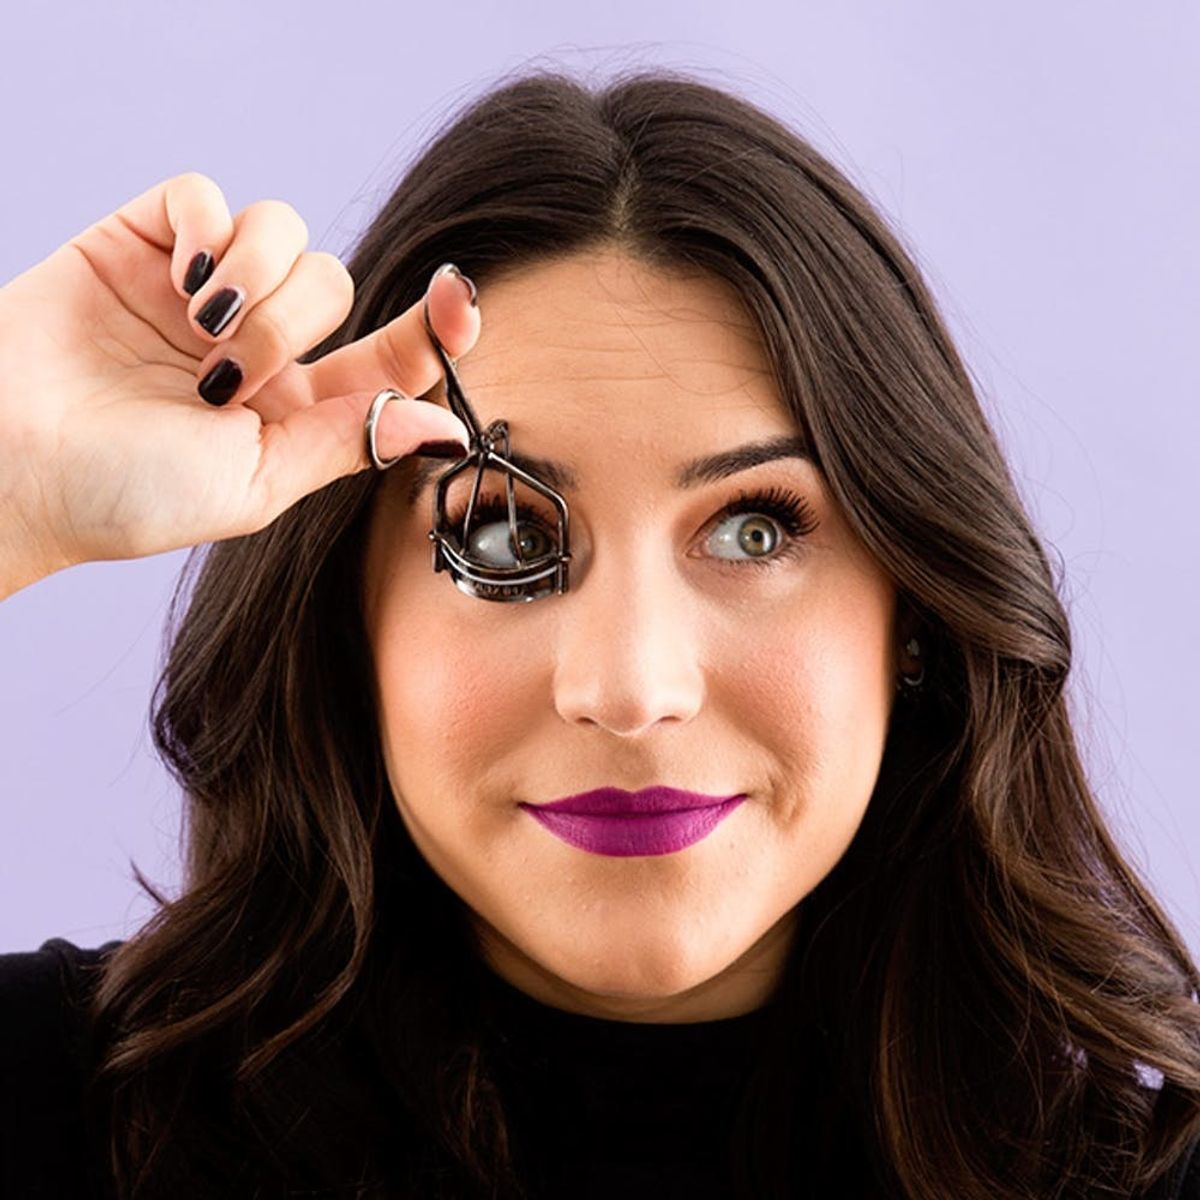 We Tried the Bizarre Lower Lash Curling Hack That Took Over Instagram